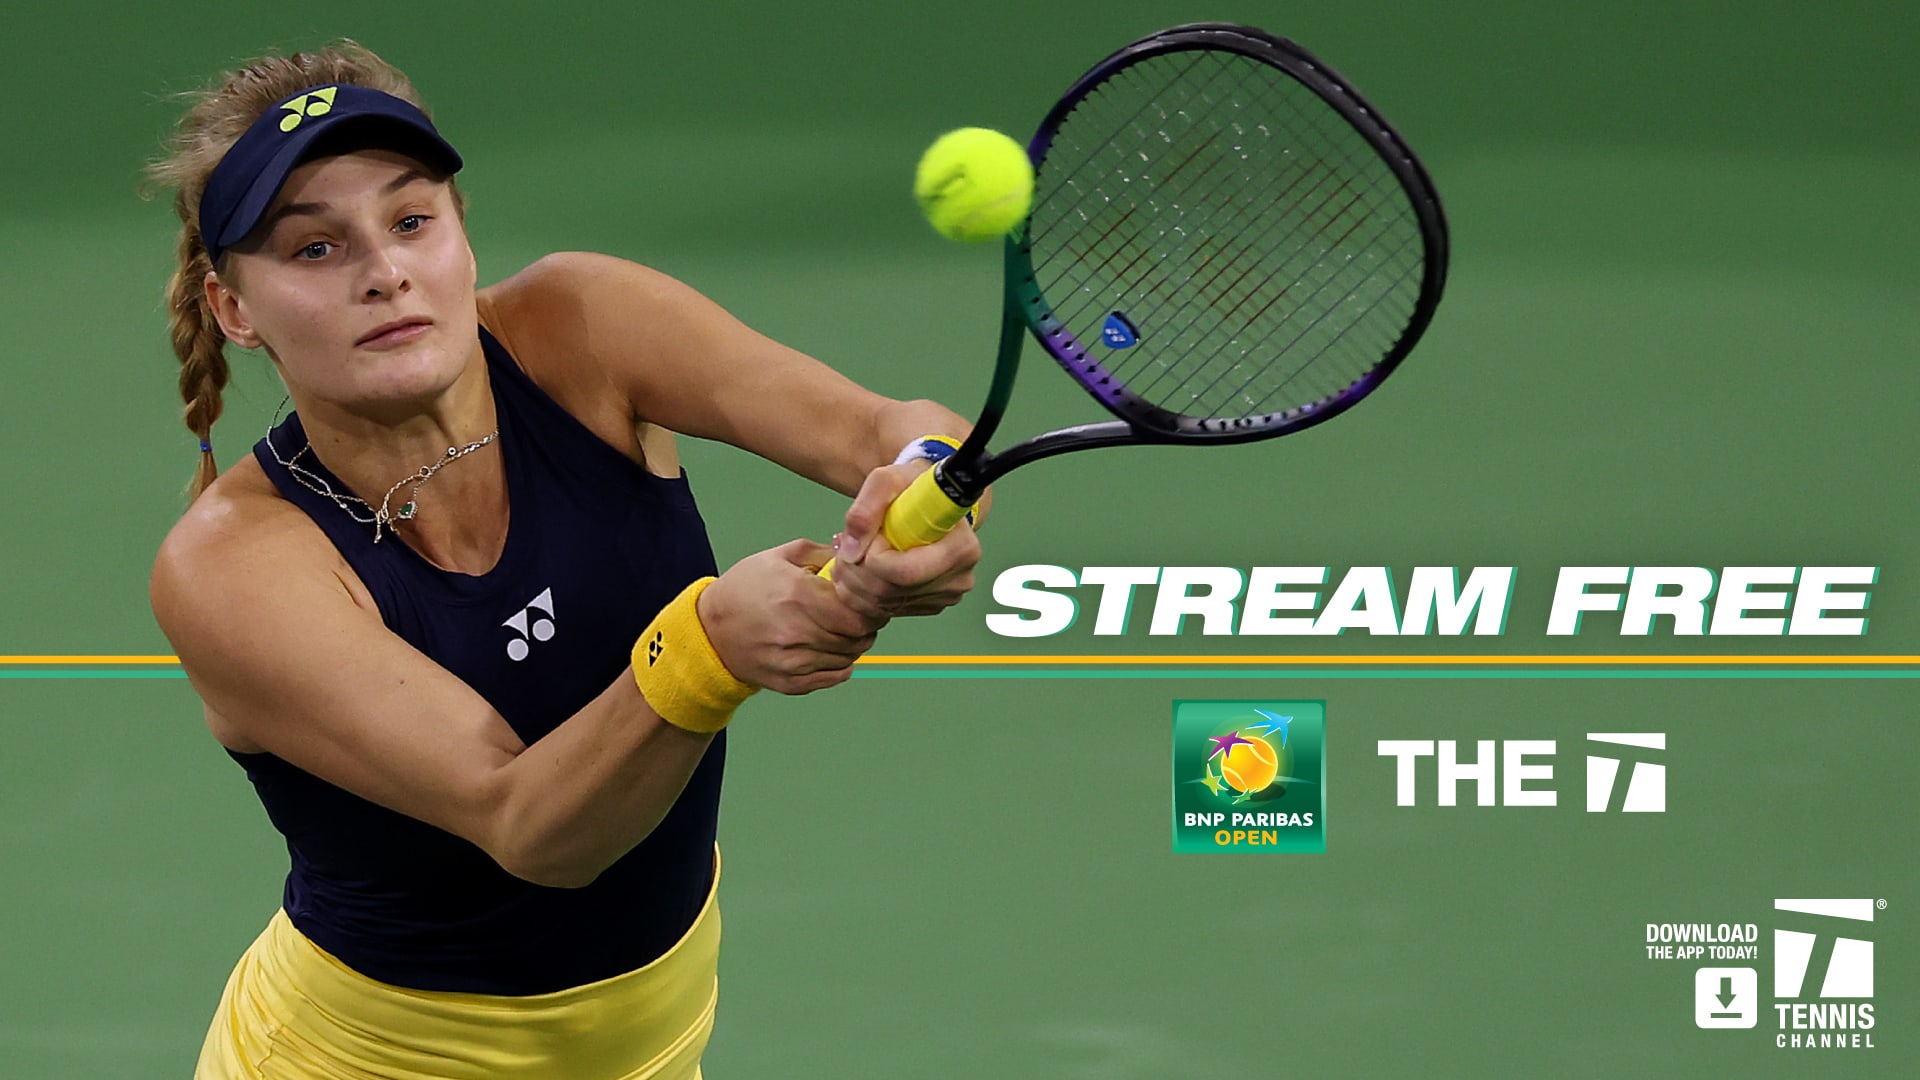 Tennis Channel providing free tune-in to doubles match featuring the Yastremska sisters tonight from Indian Wells